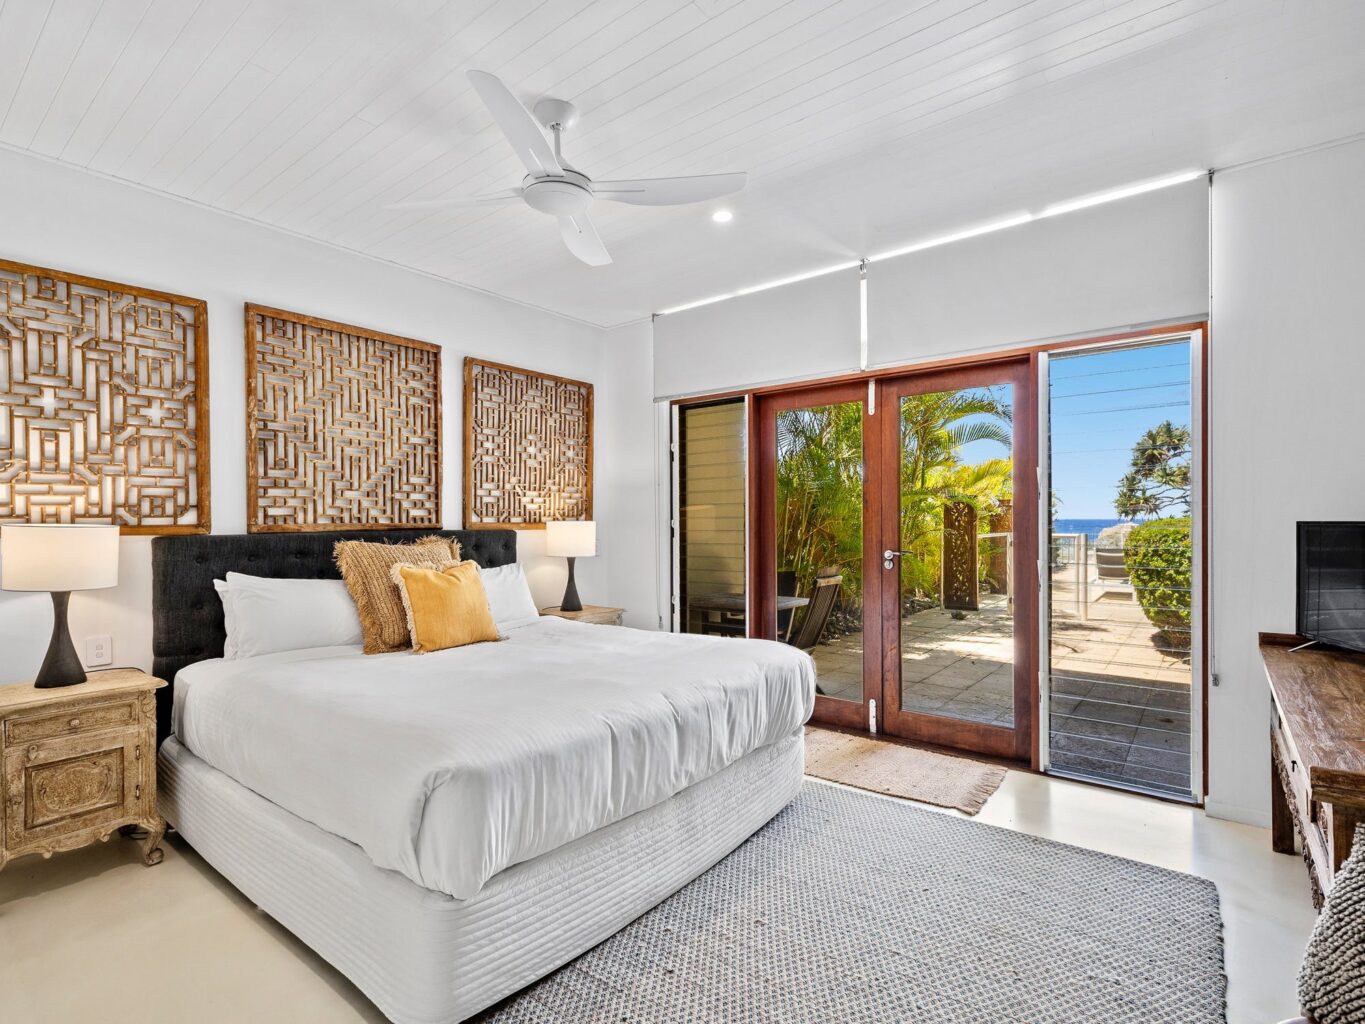 Main bedroom - walk straight out to the pool, hot tub and beach access